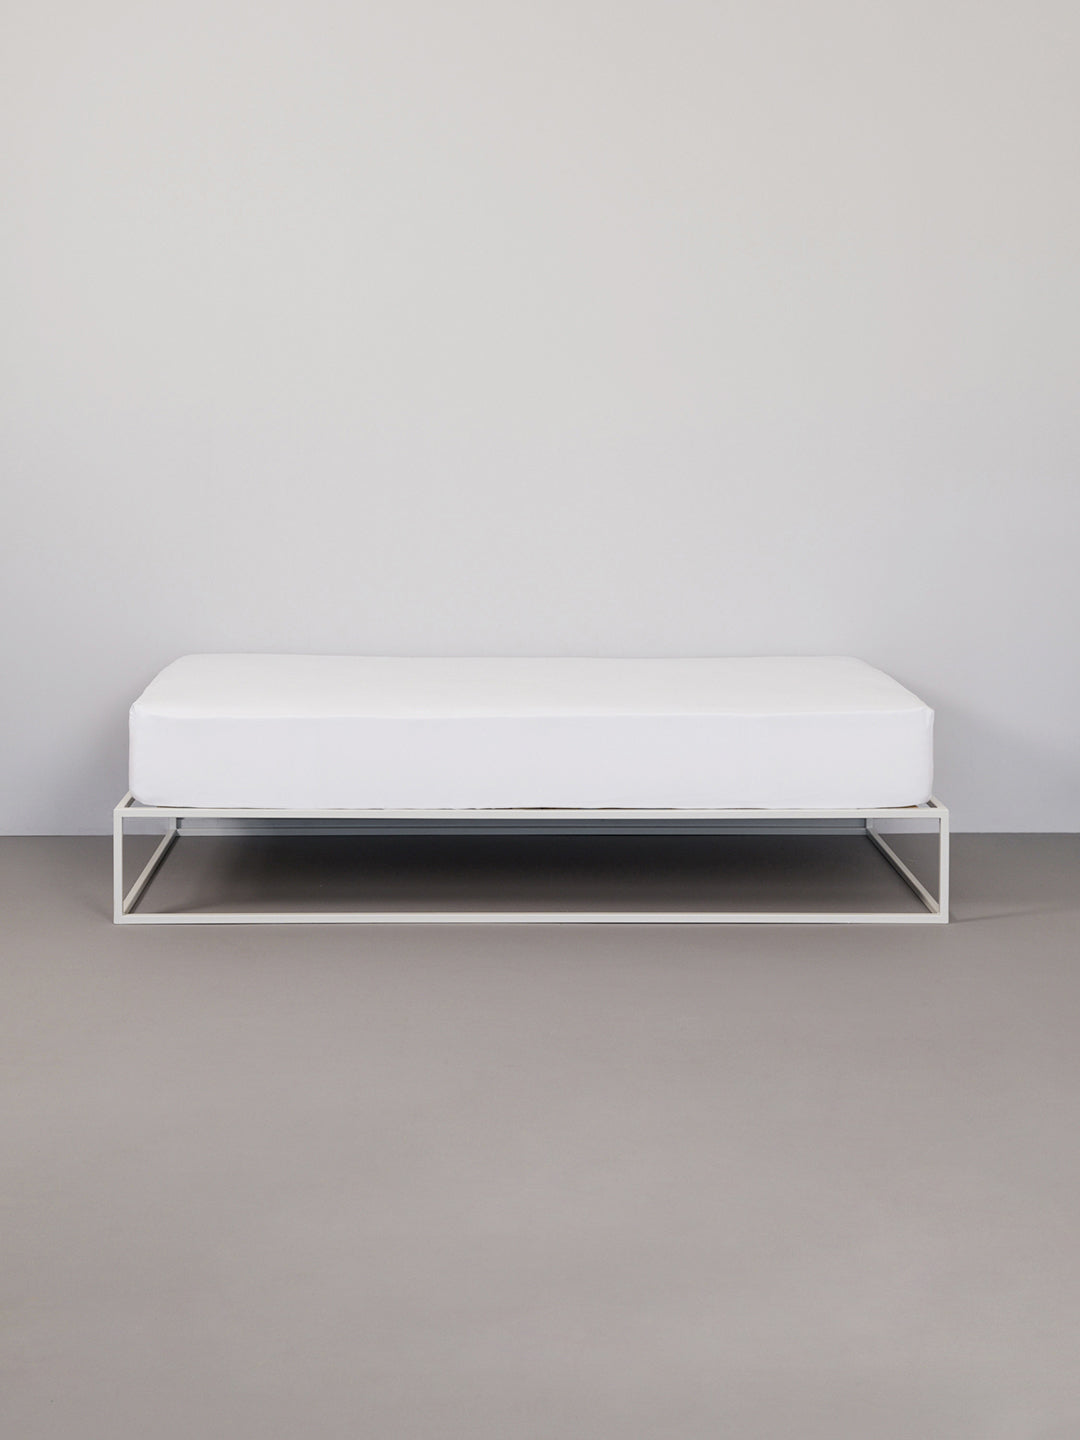 Hey you are on Fitted Bed Sheet | Basic product page. Image: Fitted white Sheet on a white metal  frame bed in a grey room 